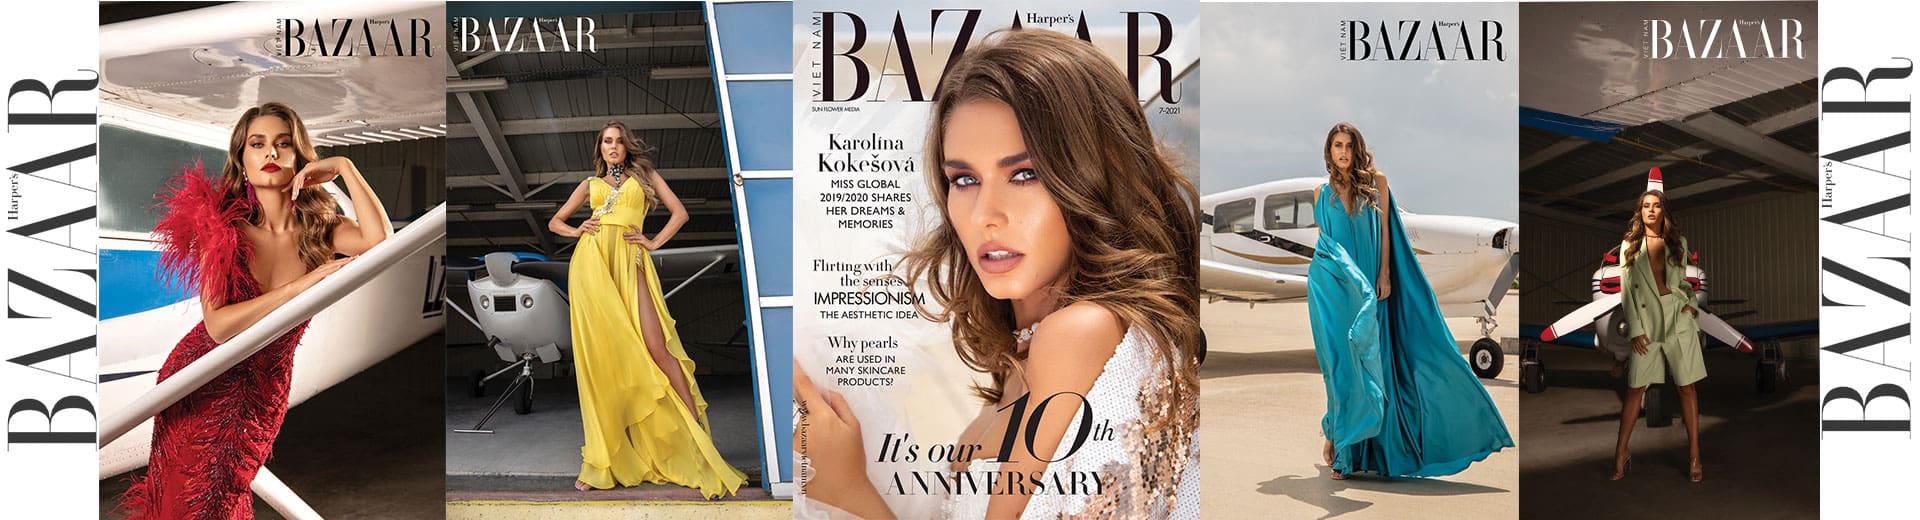 Five magazine covers of harper's bazaar featuring a woman in various elegant outfits posing near and inside a private jet.